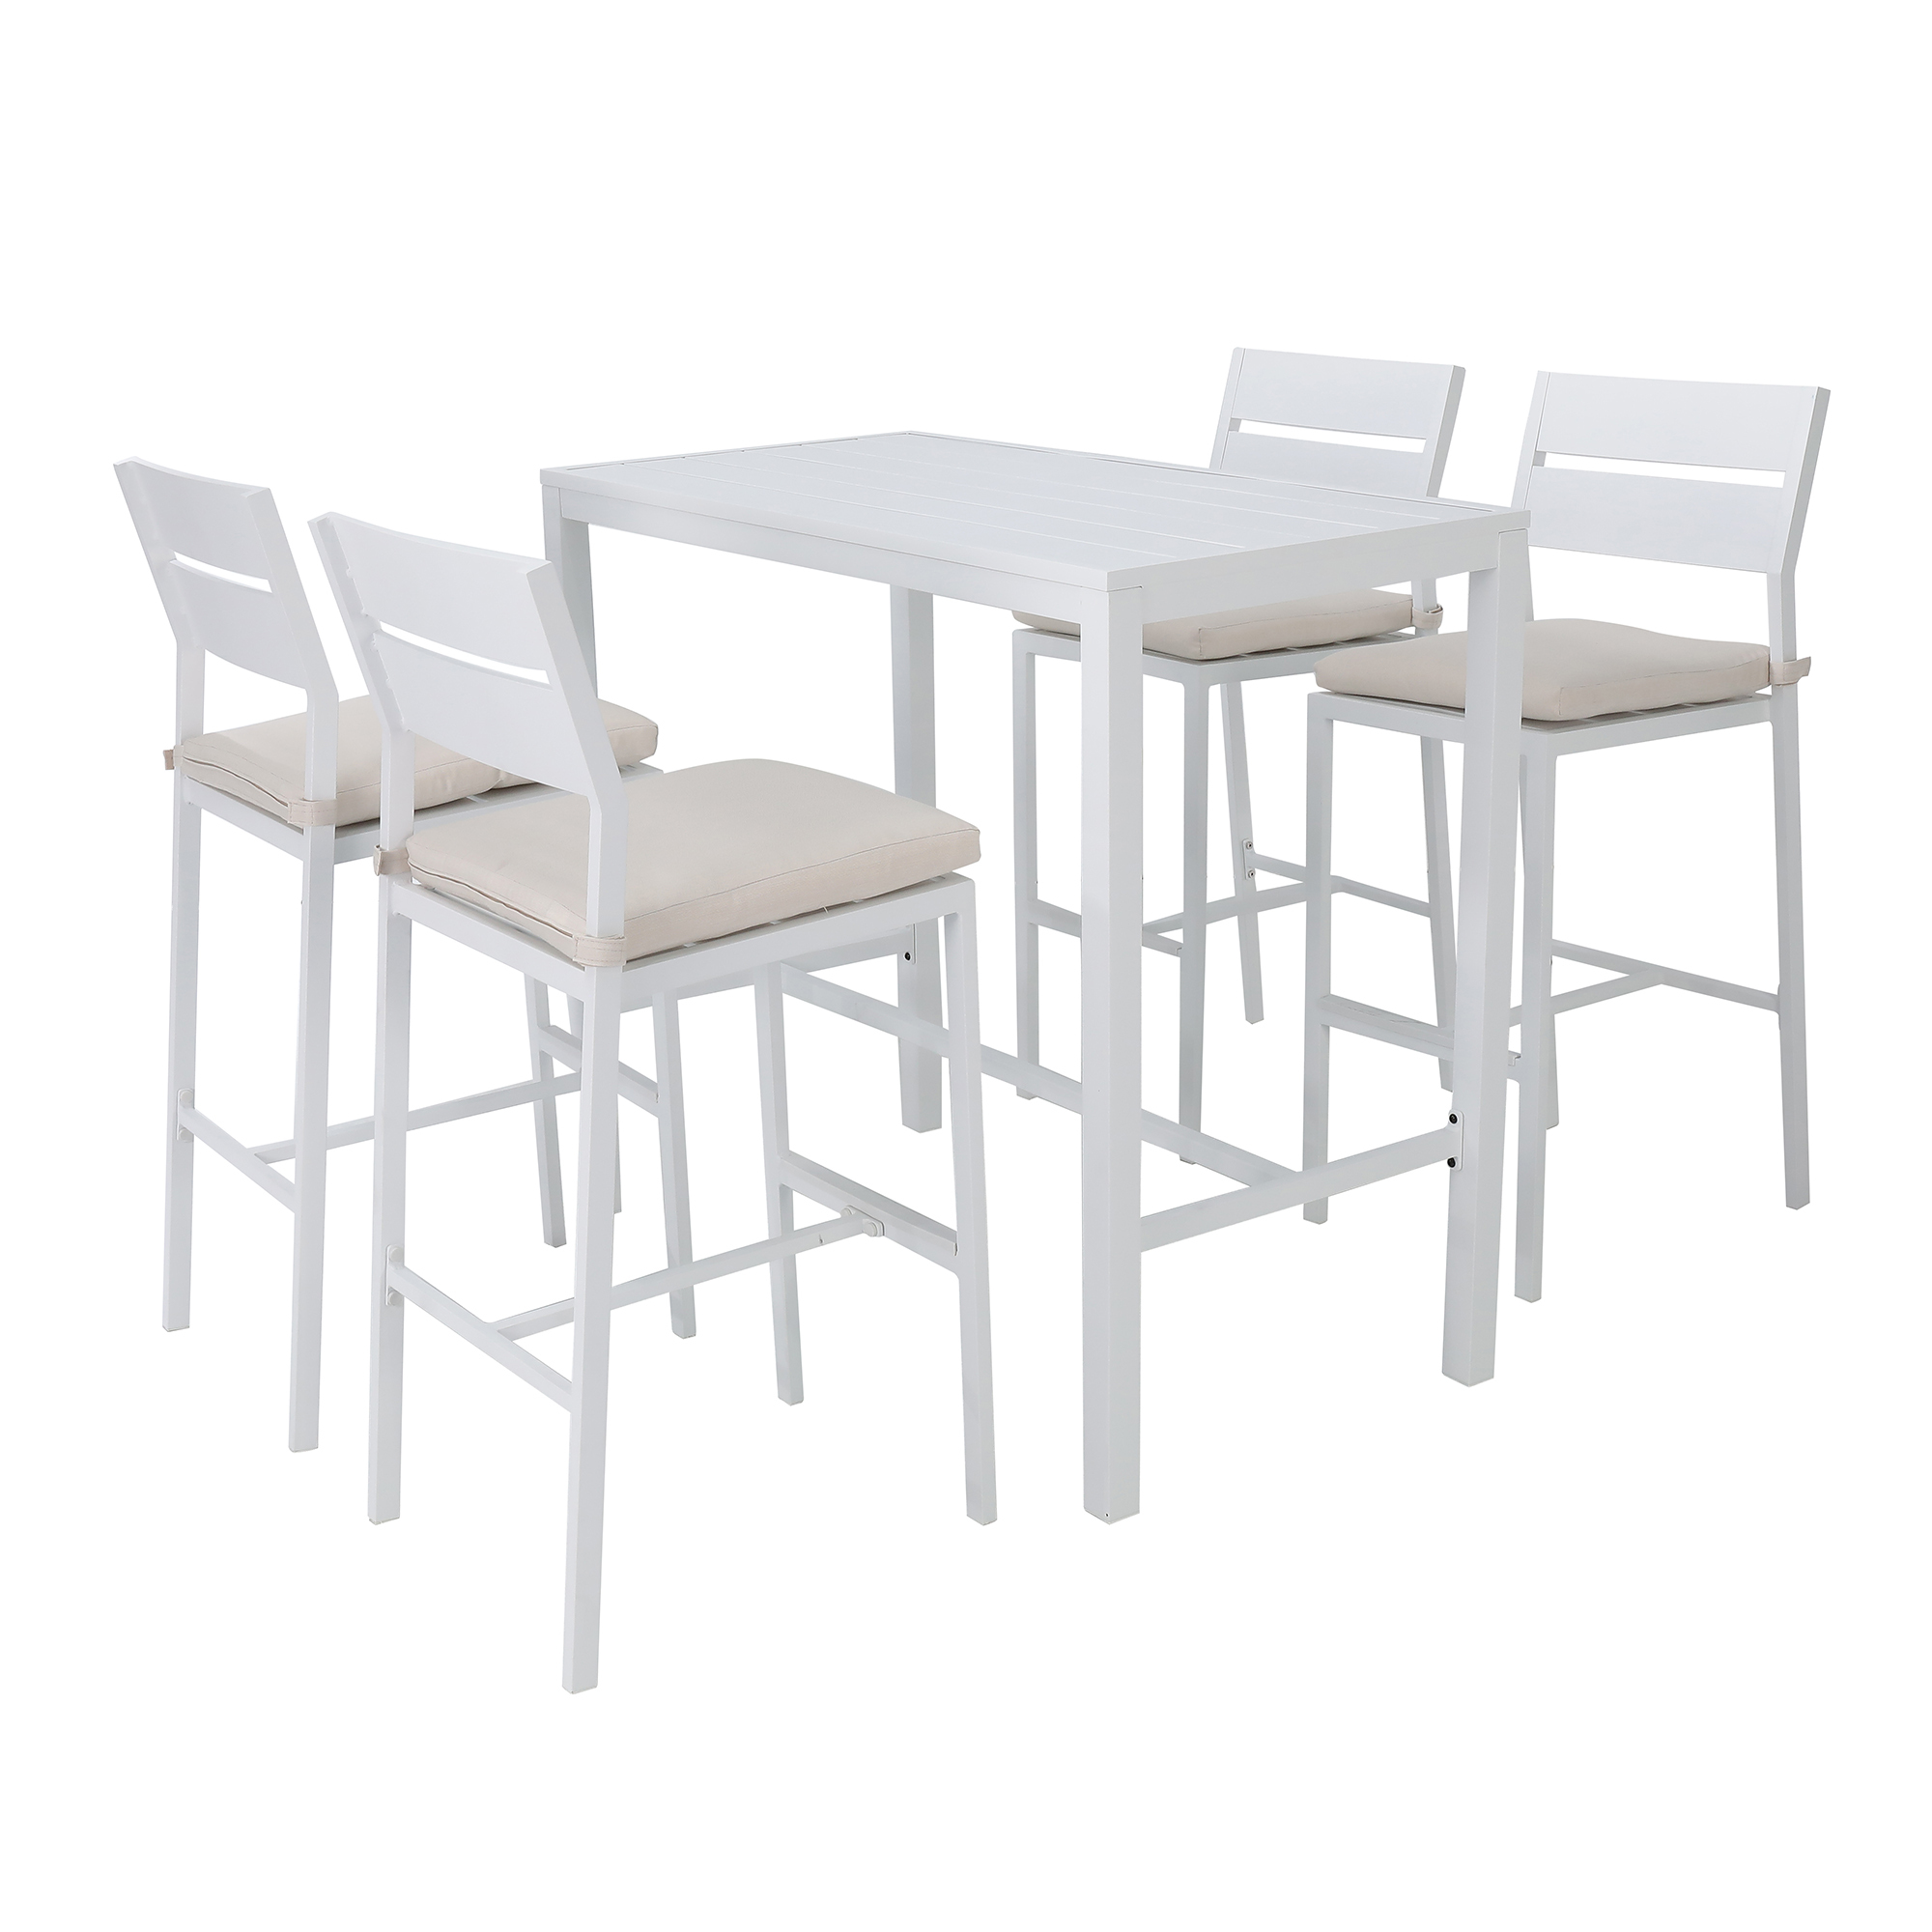 Temple Webster 4 Seater Kos Aluminium, Outdoor Pub Table Set For 4